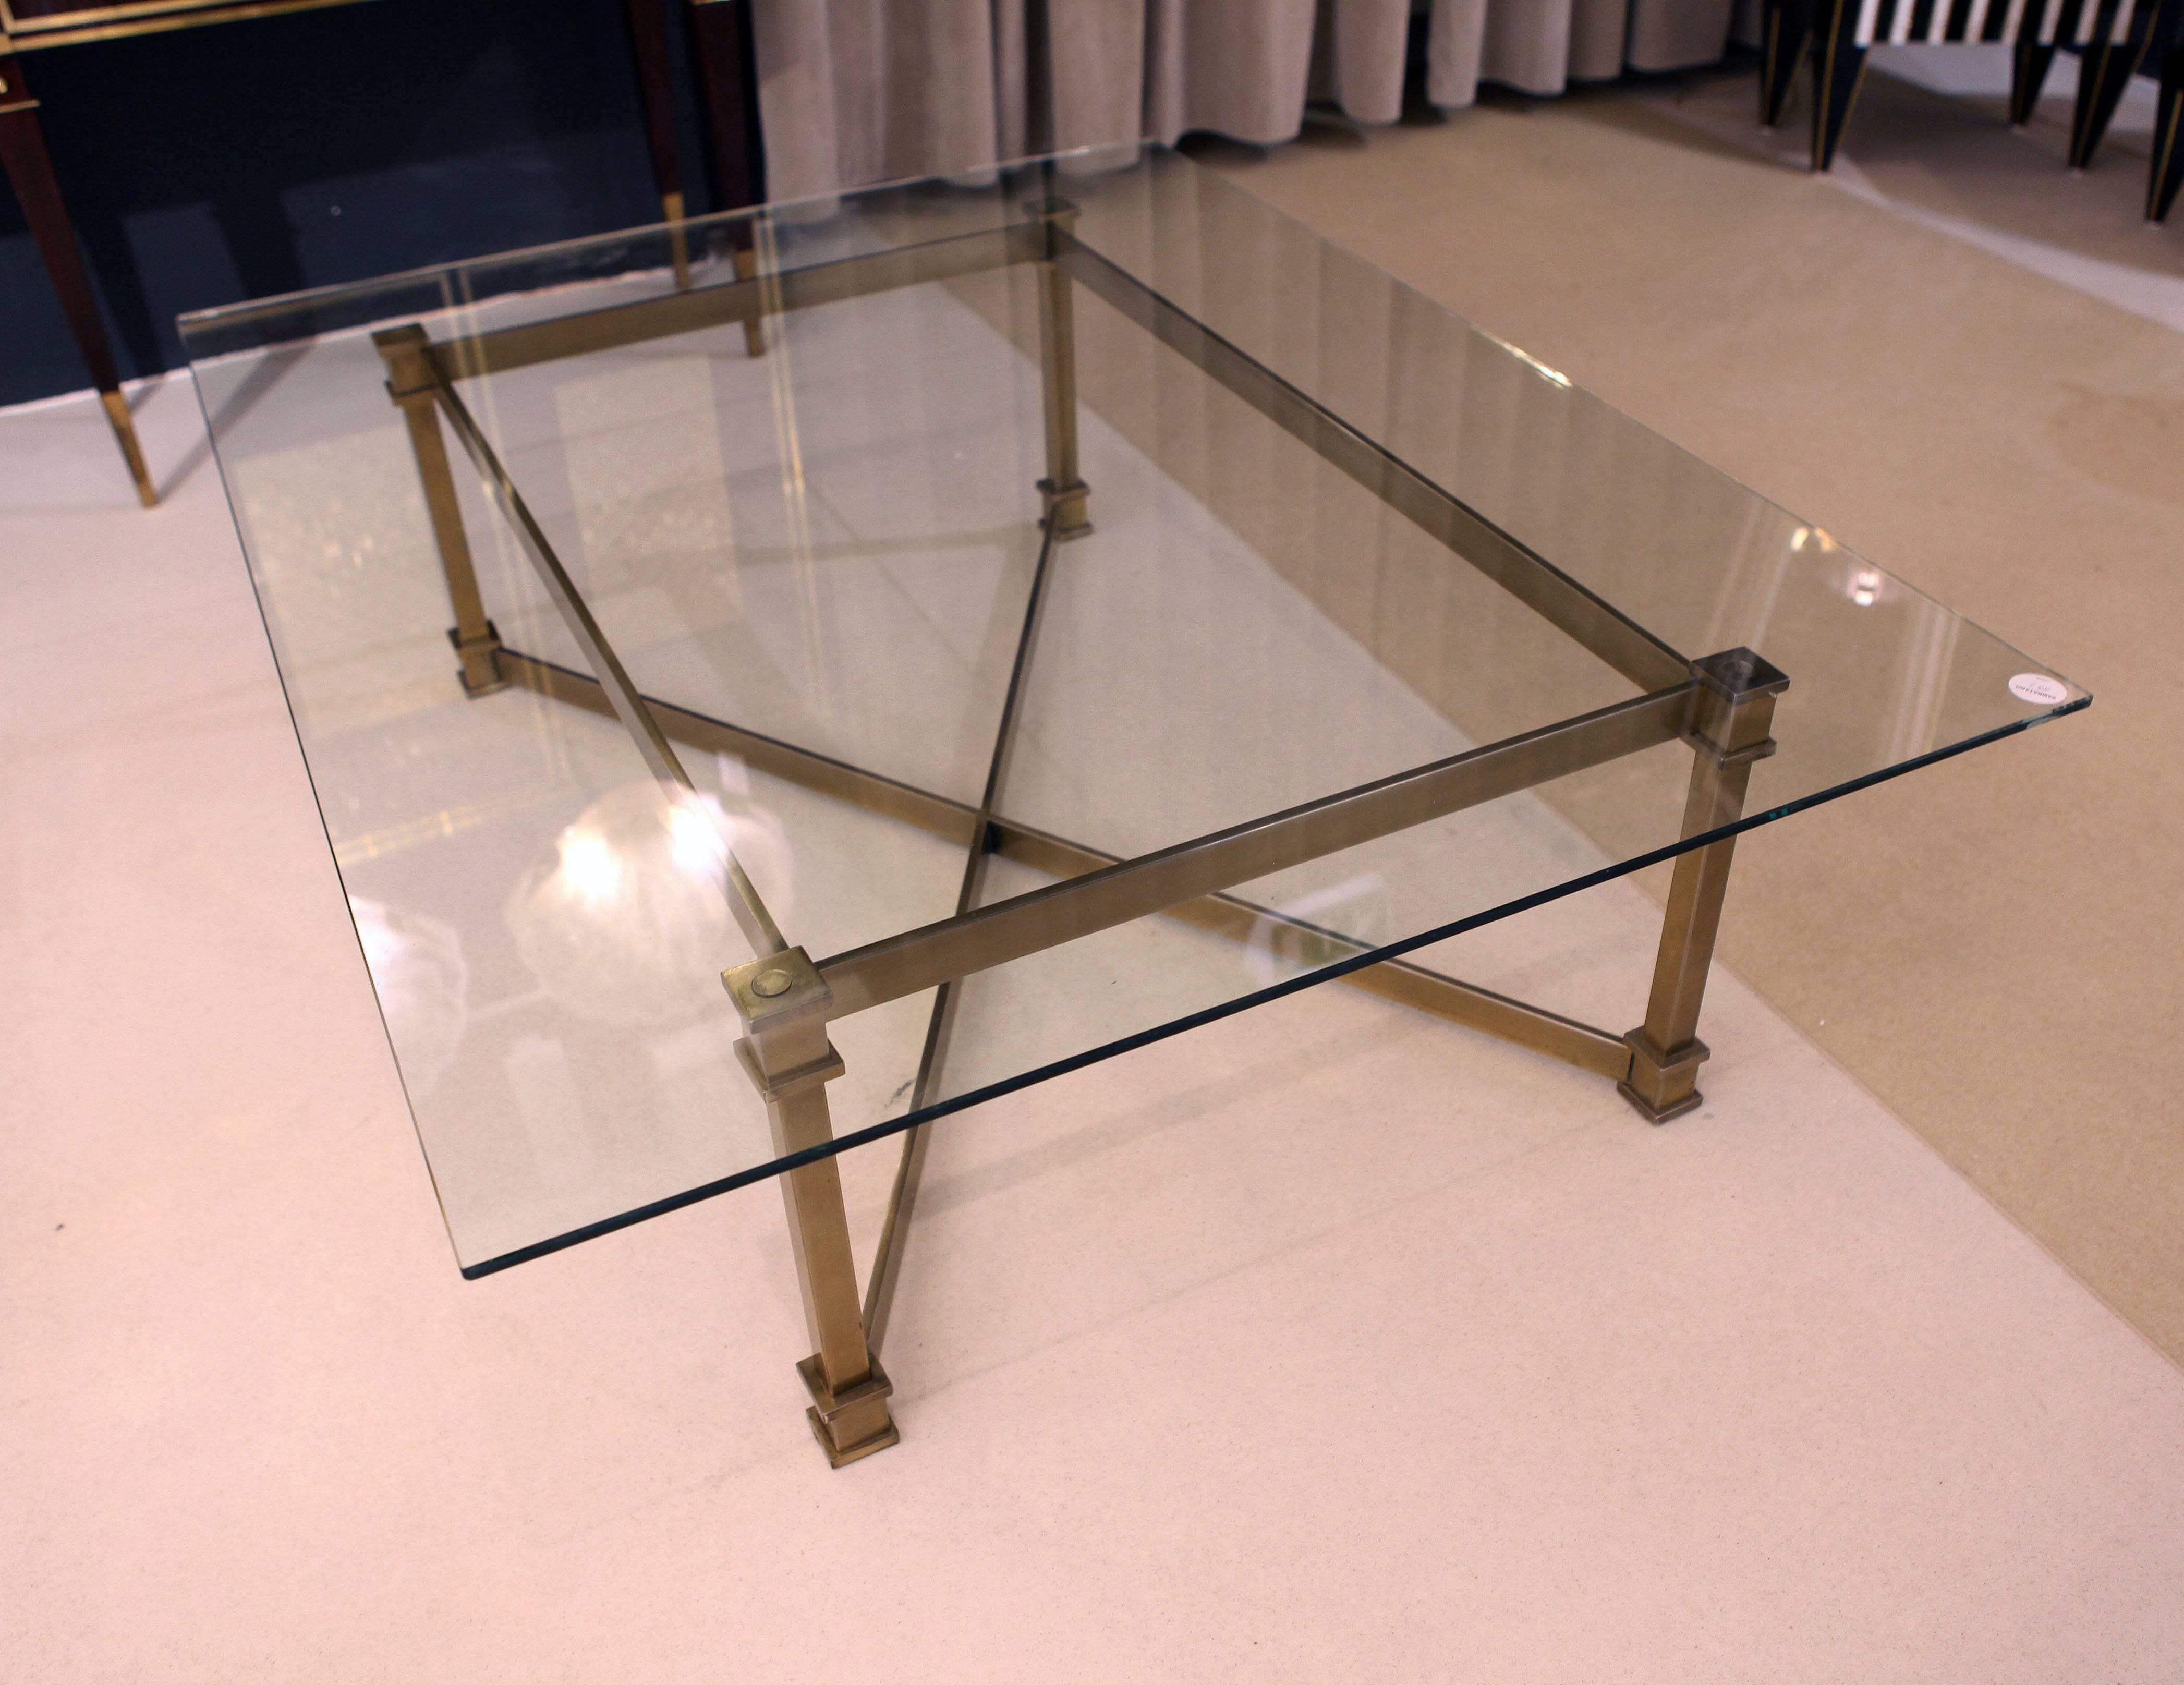 A French coffee table in brass and glass neoclassic design attributed to Maison Jenson, Mid-Century.